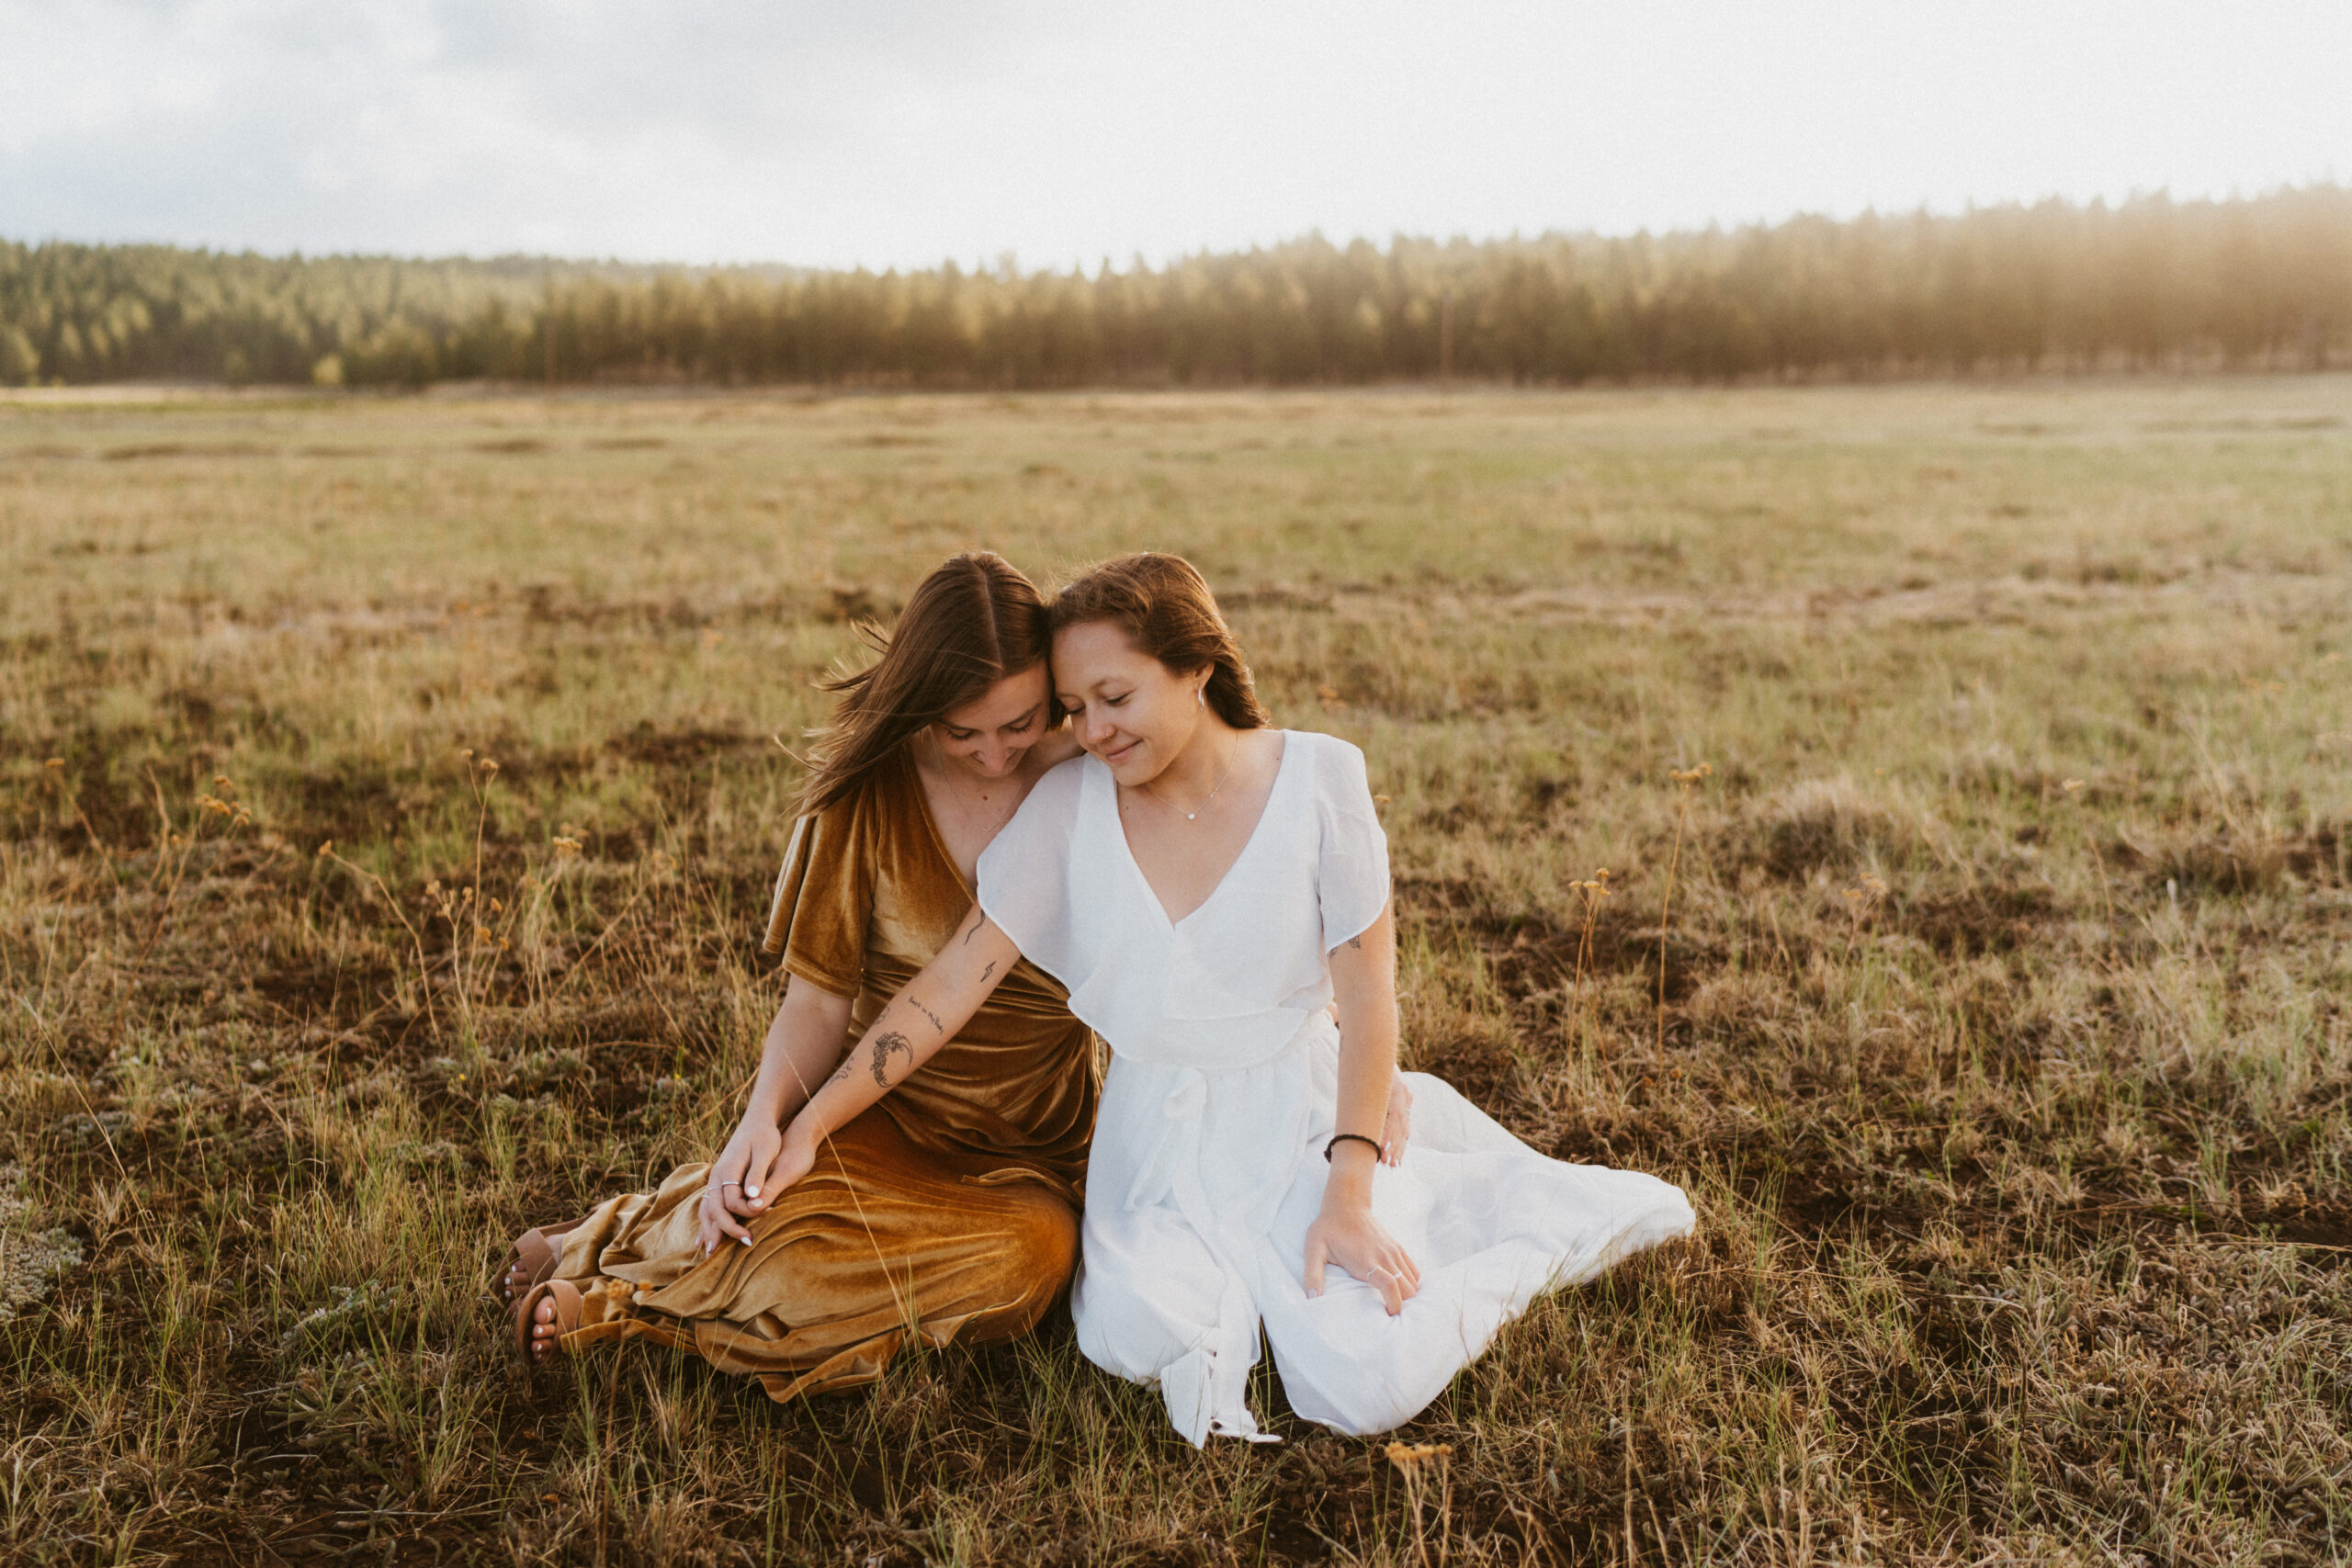 Two women, one in a white dress and the other in a mustard dress sit in a field holding hands